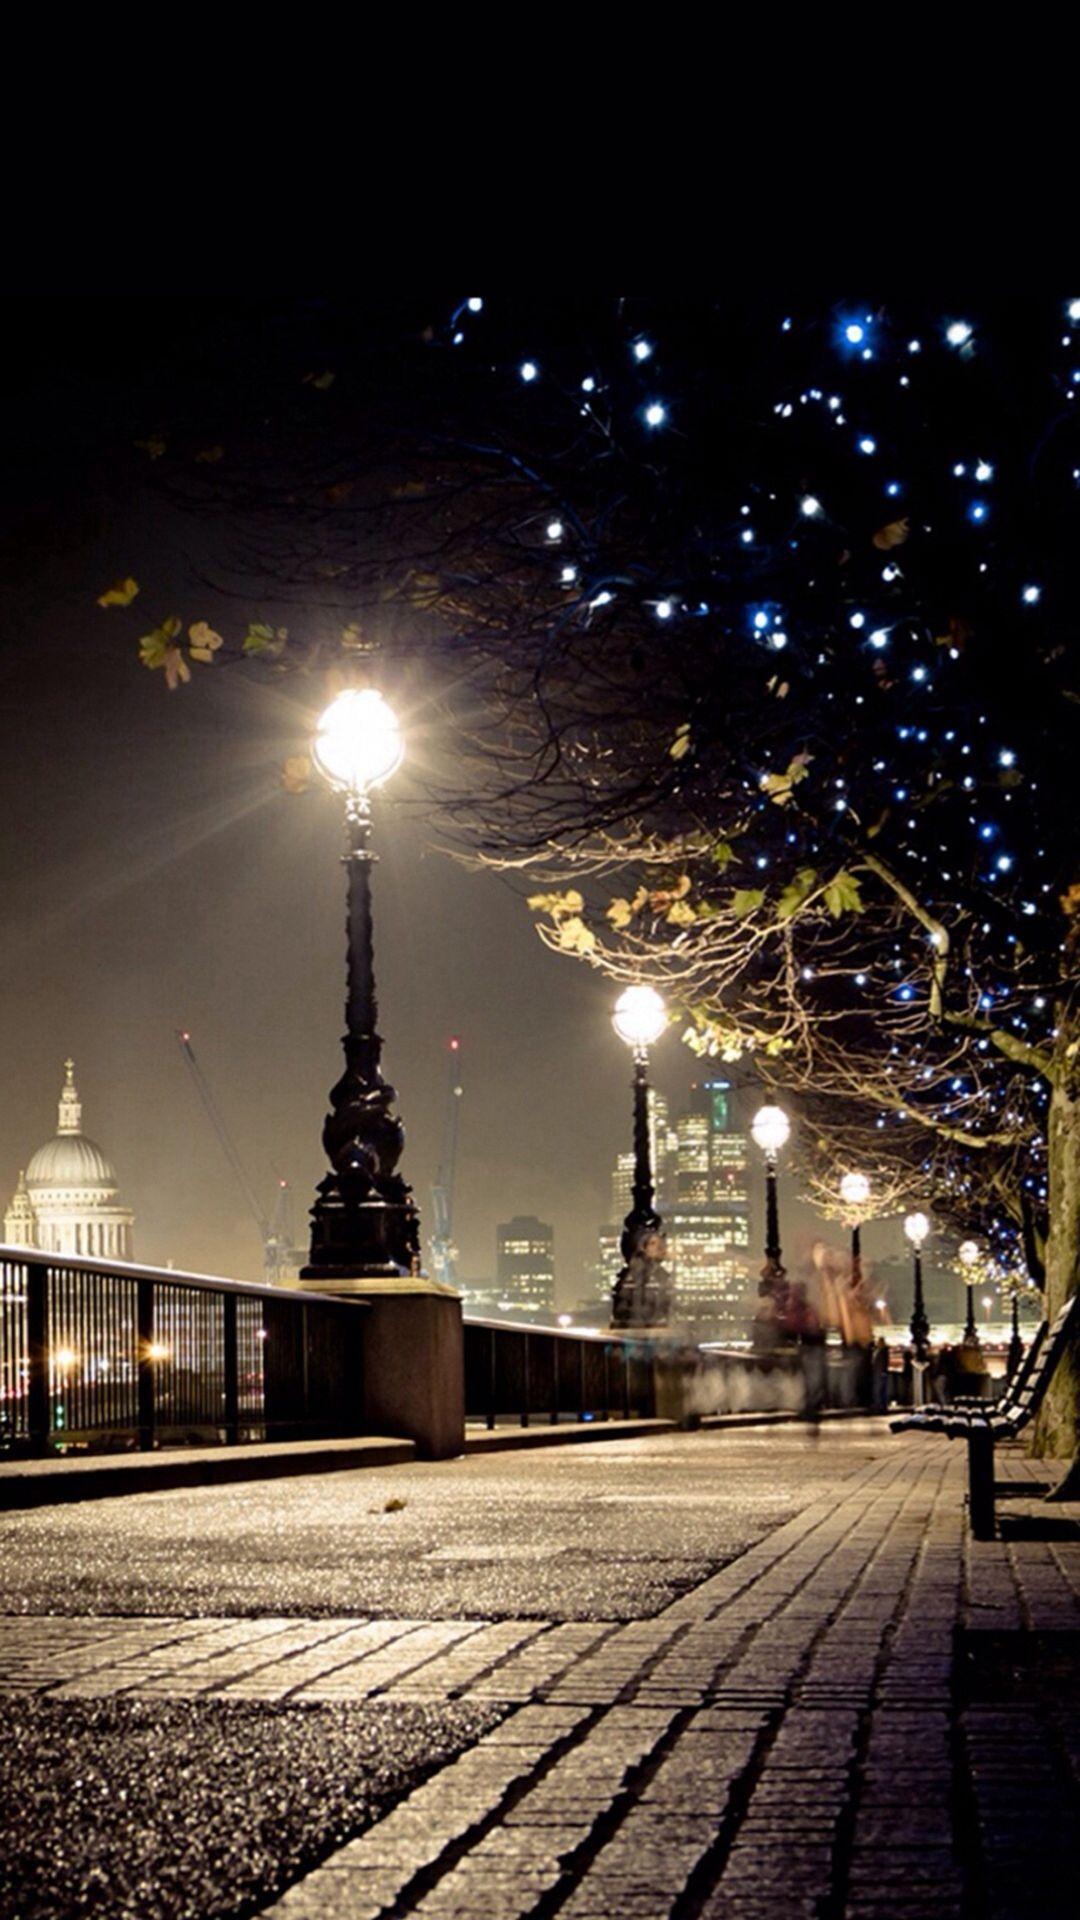 London Christmas Iphone Wallpapers Top Free London Christmas Iphone Backgrounds Wallpaperaccess